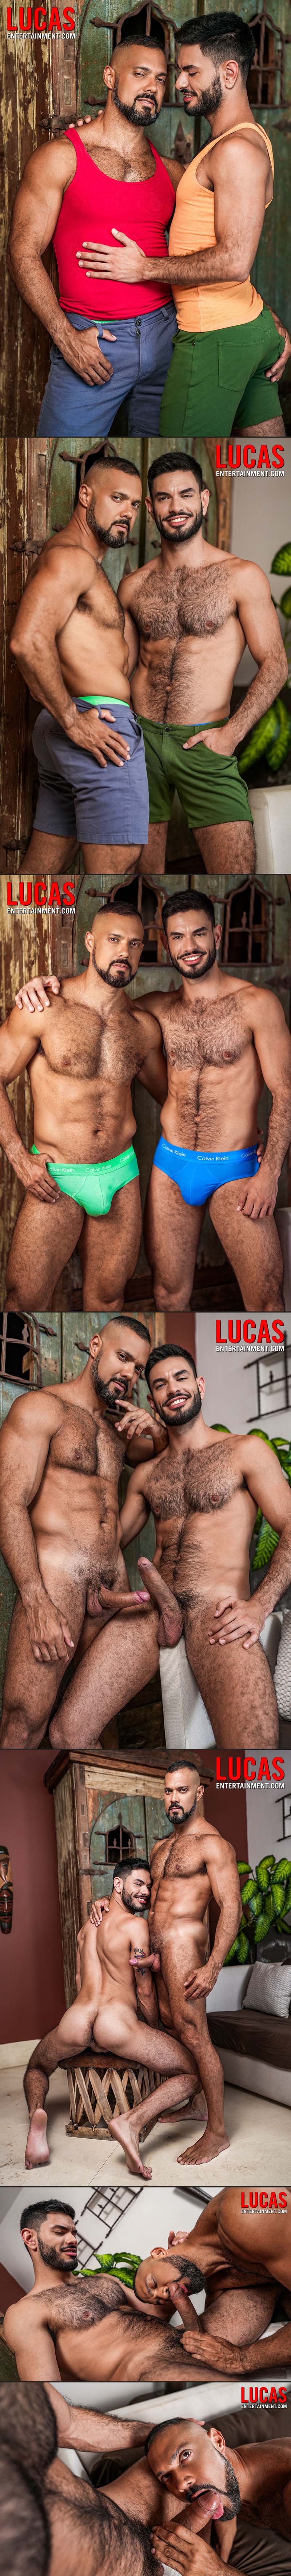 Horny As Fuck, Scene 4 (Jacob Lord And Nico Zetta Flip Fuck) at LucasEntertainment